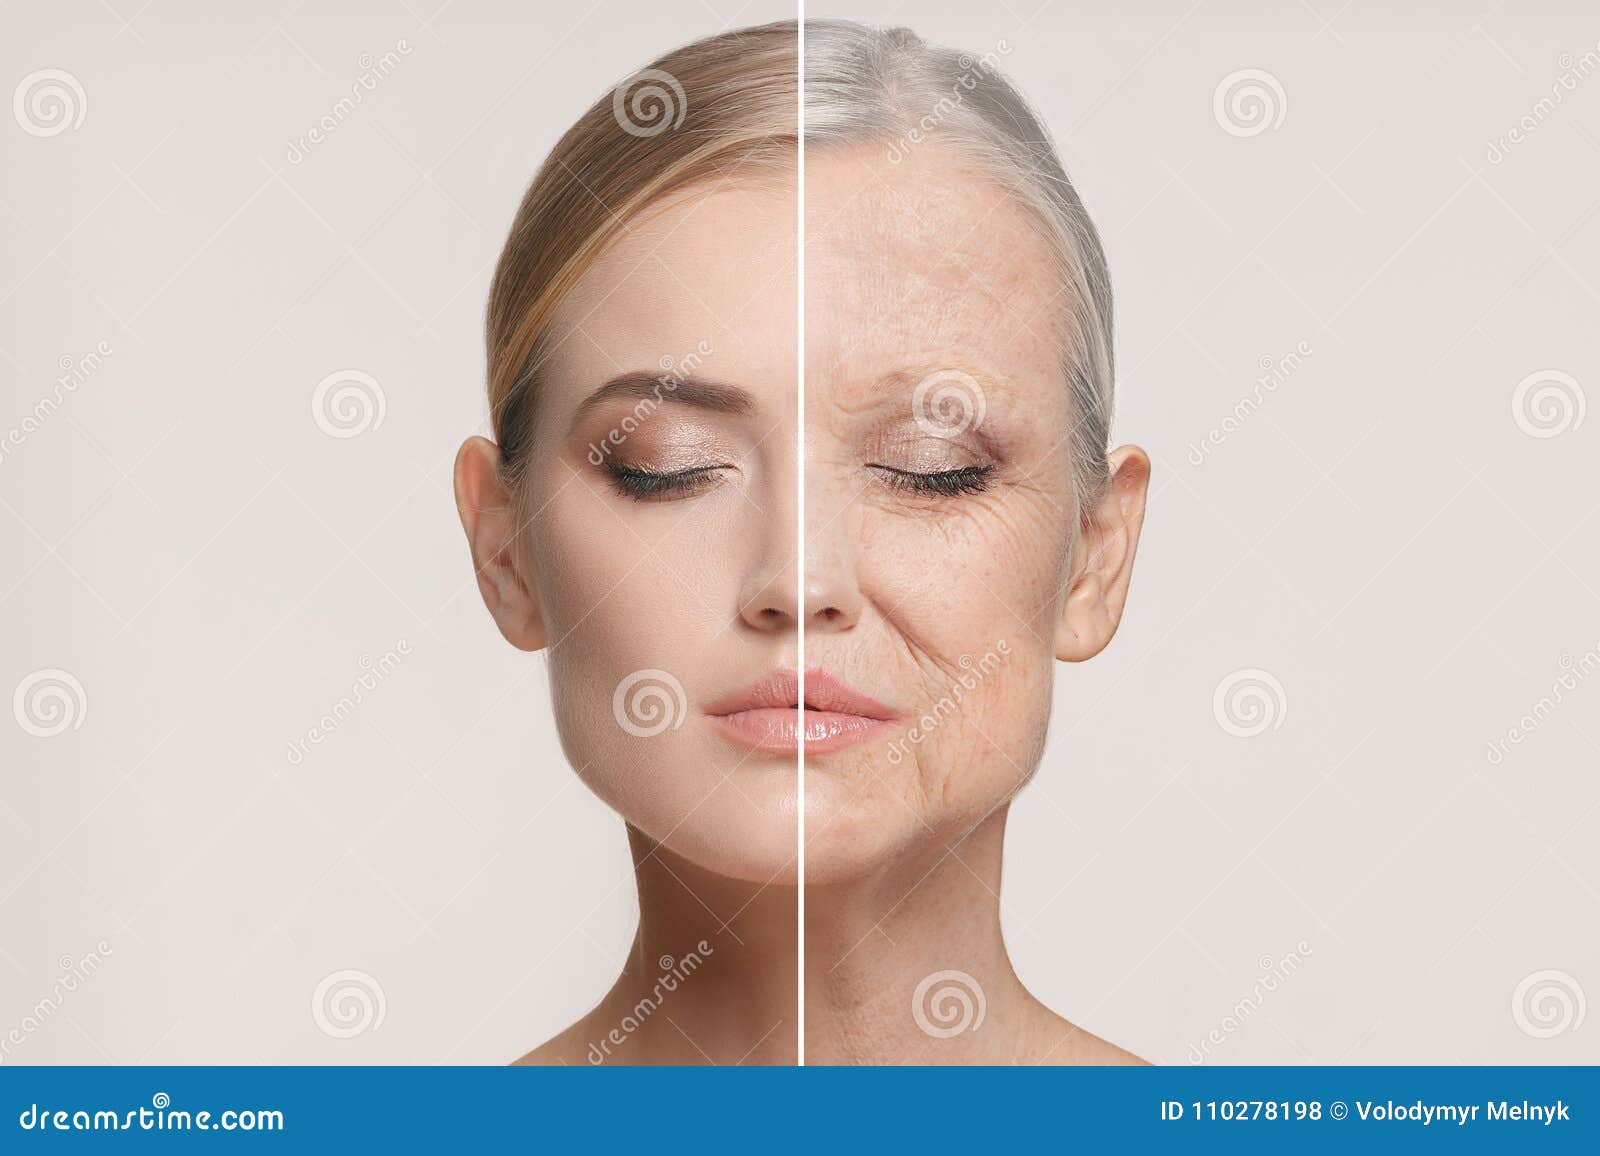 comparison. portrait of beautiful woman with problem and clean skin, aging and youth concept, beauty treatment